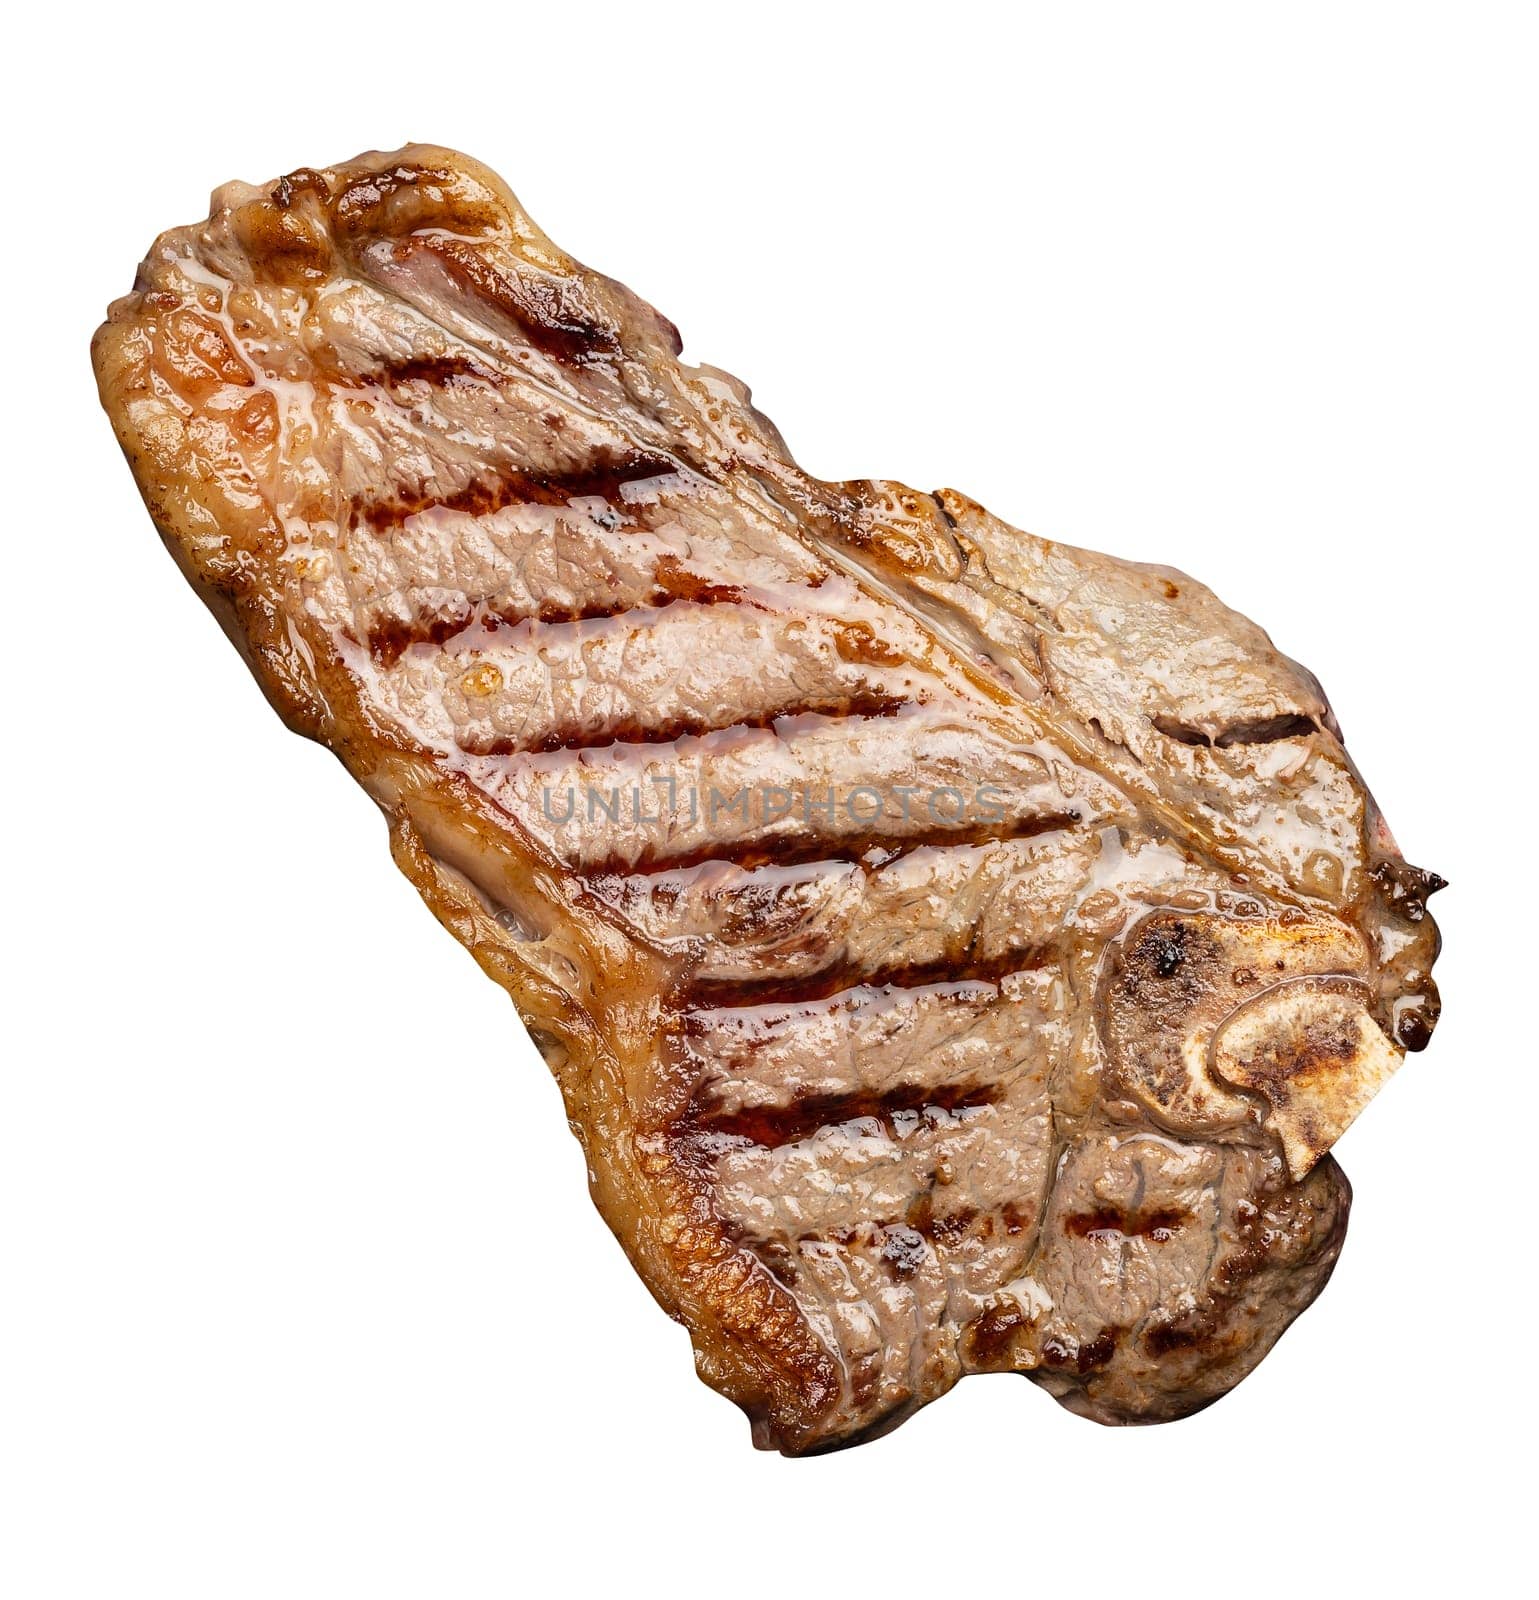 Whole fried New York beef steak on a white background, striploin doneness rare by ndanko